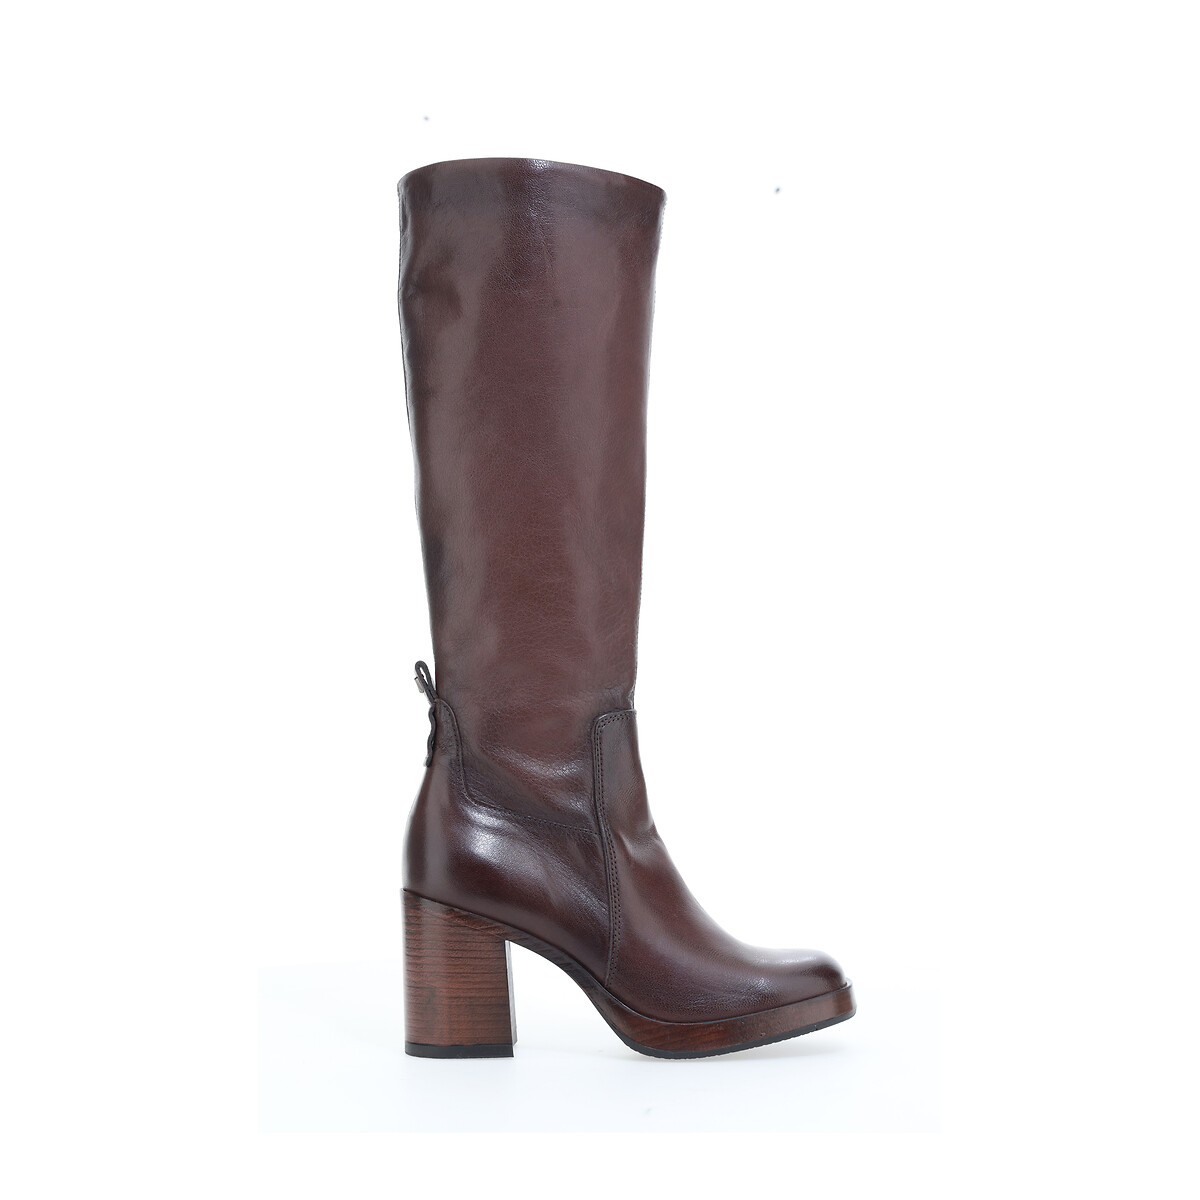 Leather Heeled Calf Boots with Square Toe